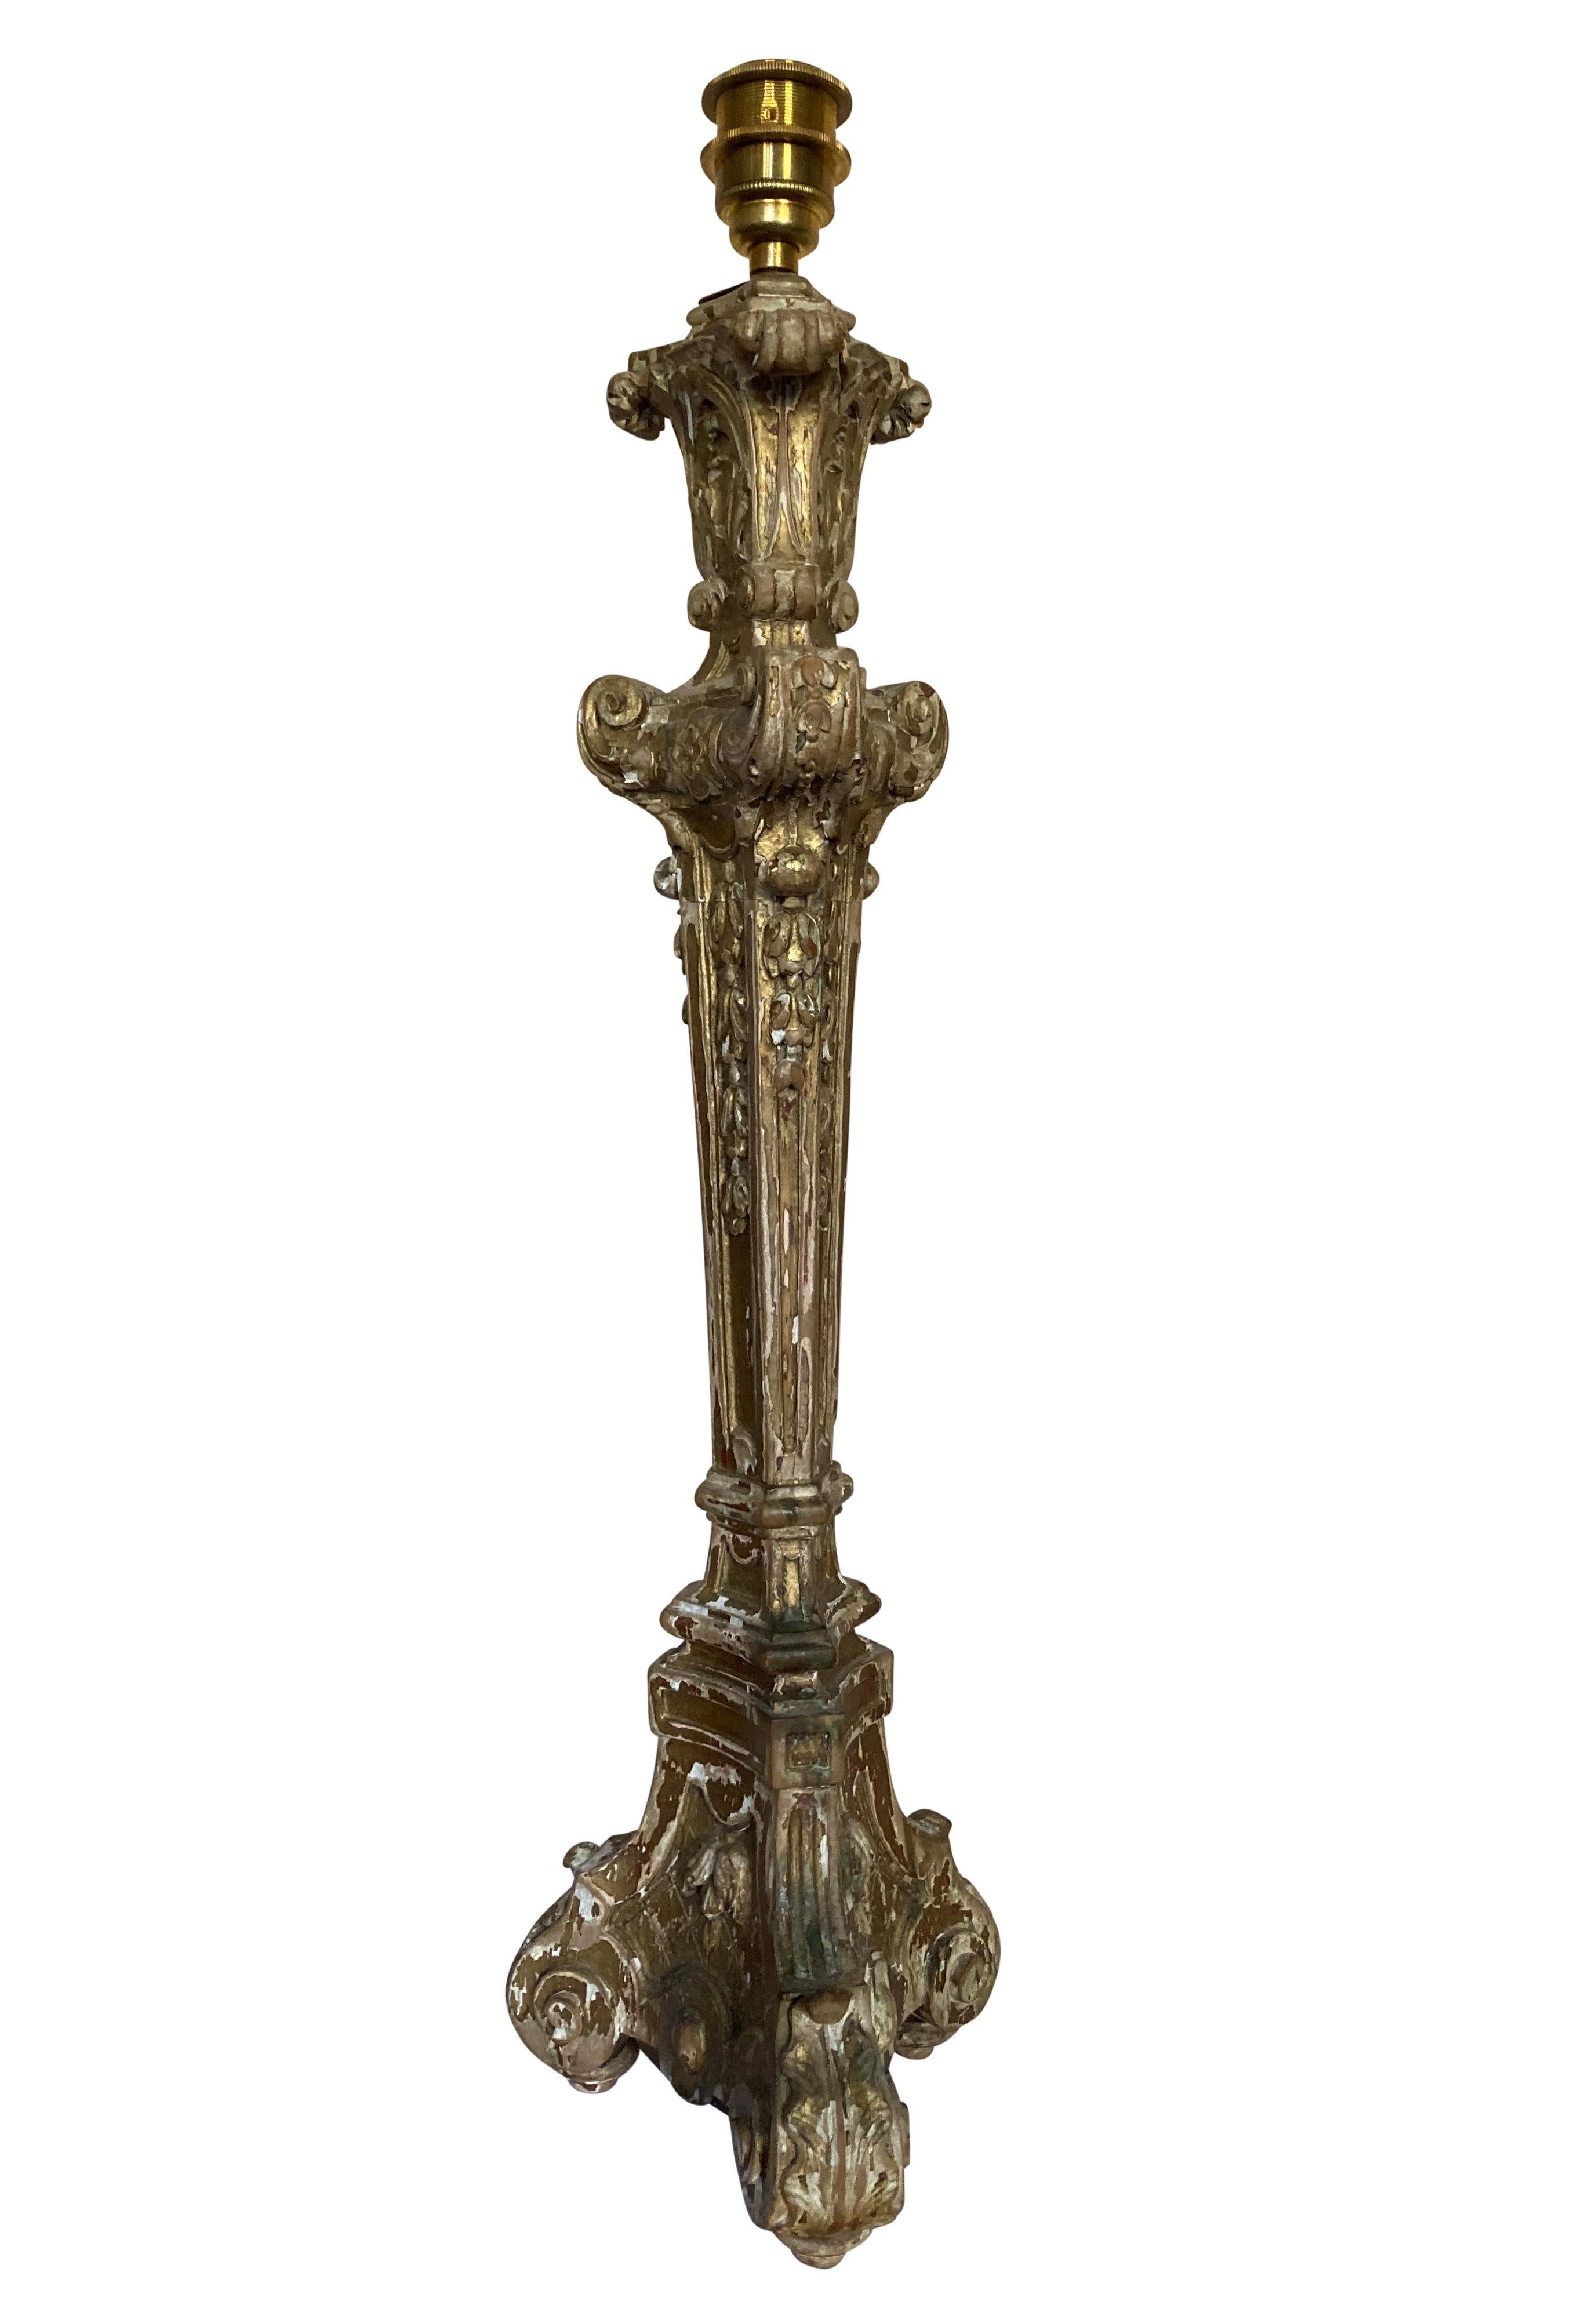 A large English Baroque carved lamp with traces of the original gilding, in a dry, country House condition. Wired with an antique gold silk cord with switch.